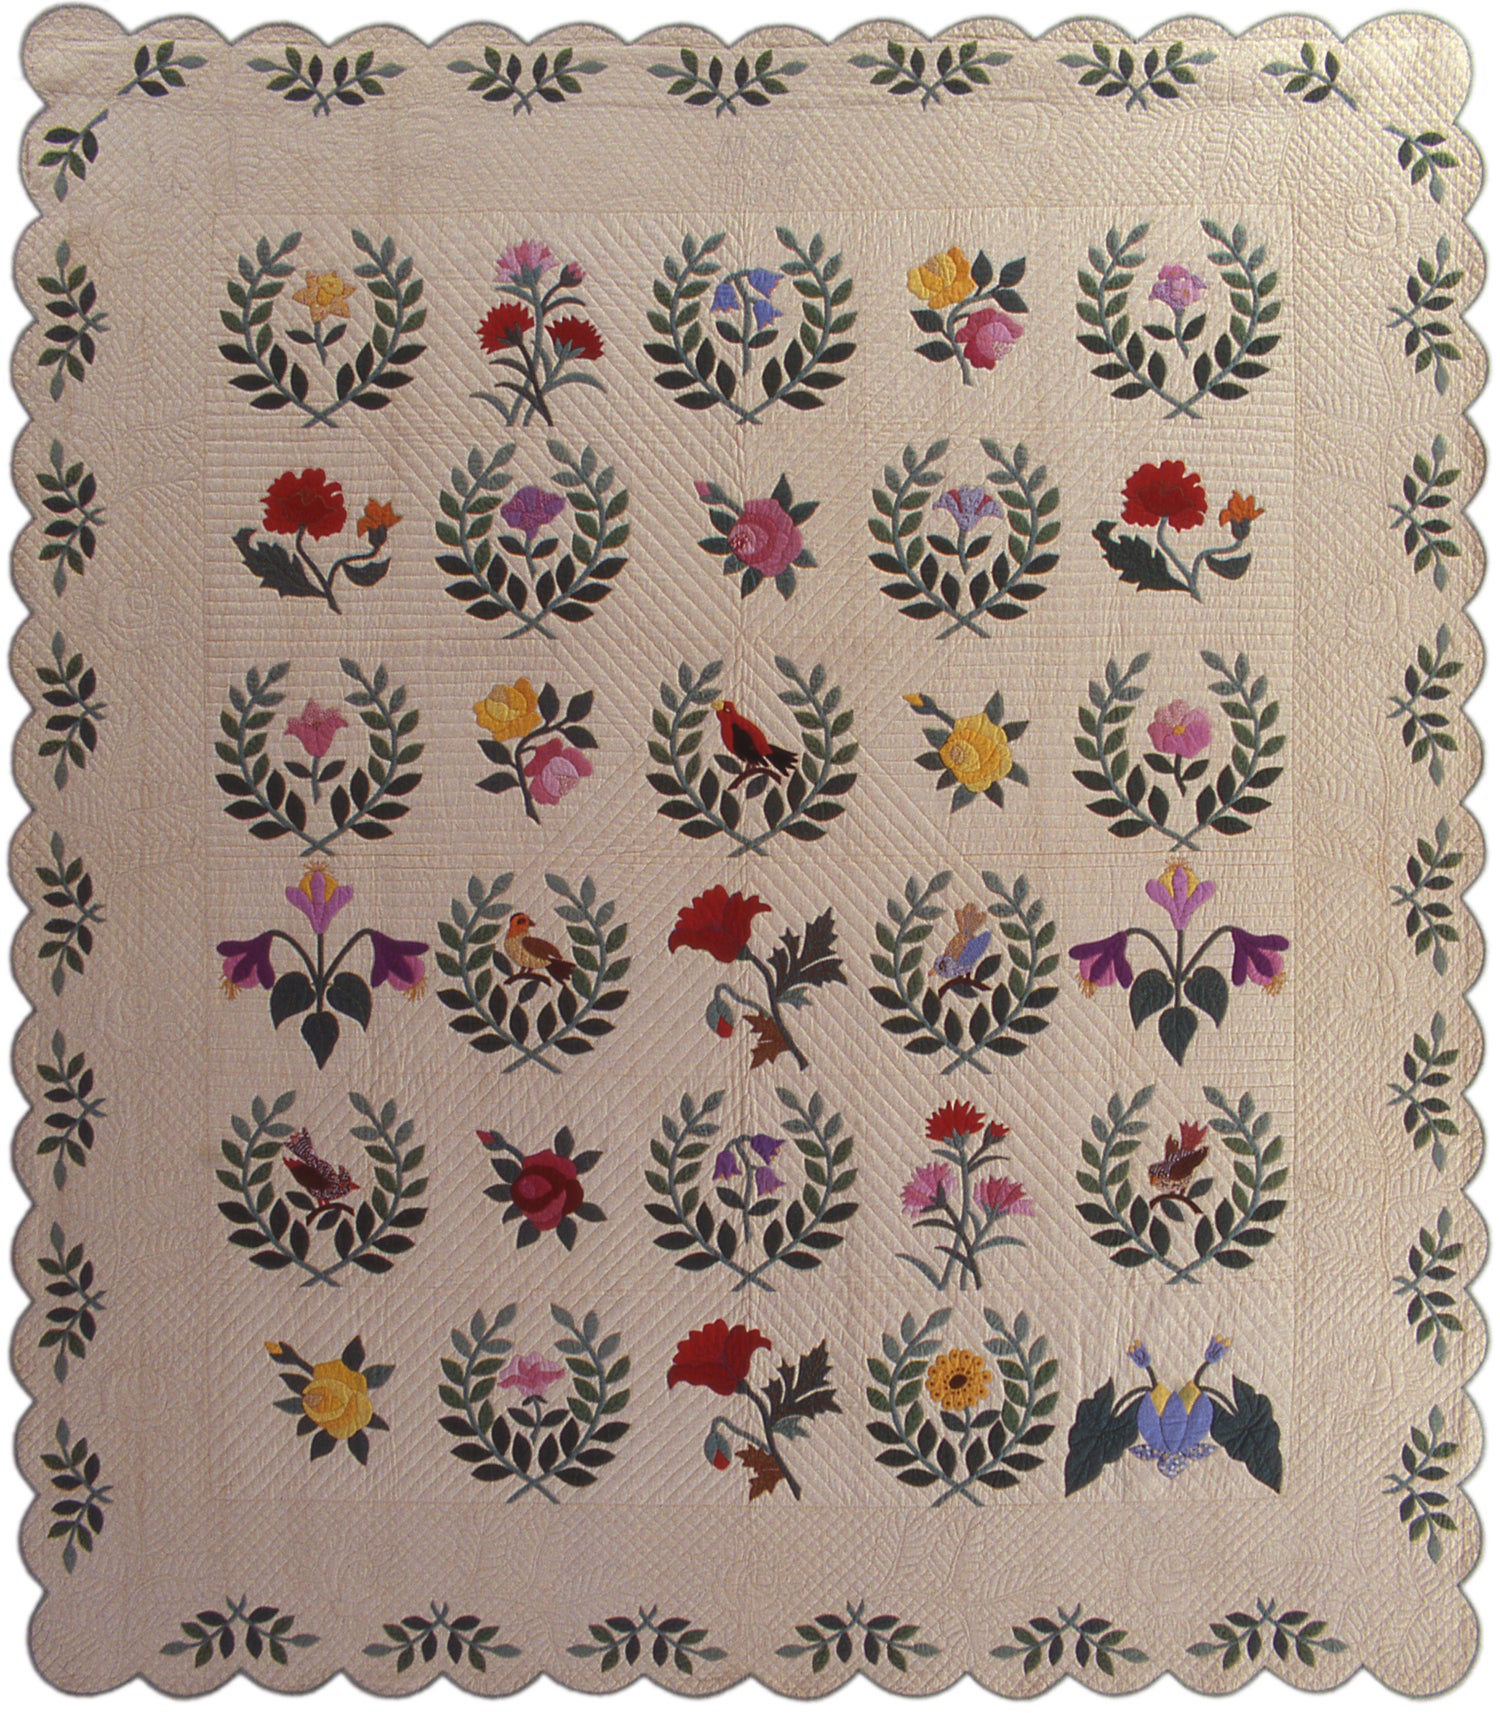 A 1935 quilt made with a "Nancy Page" laurel wreath quilt pattern